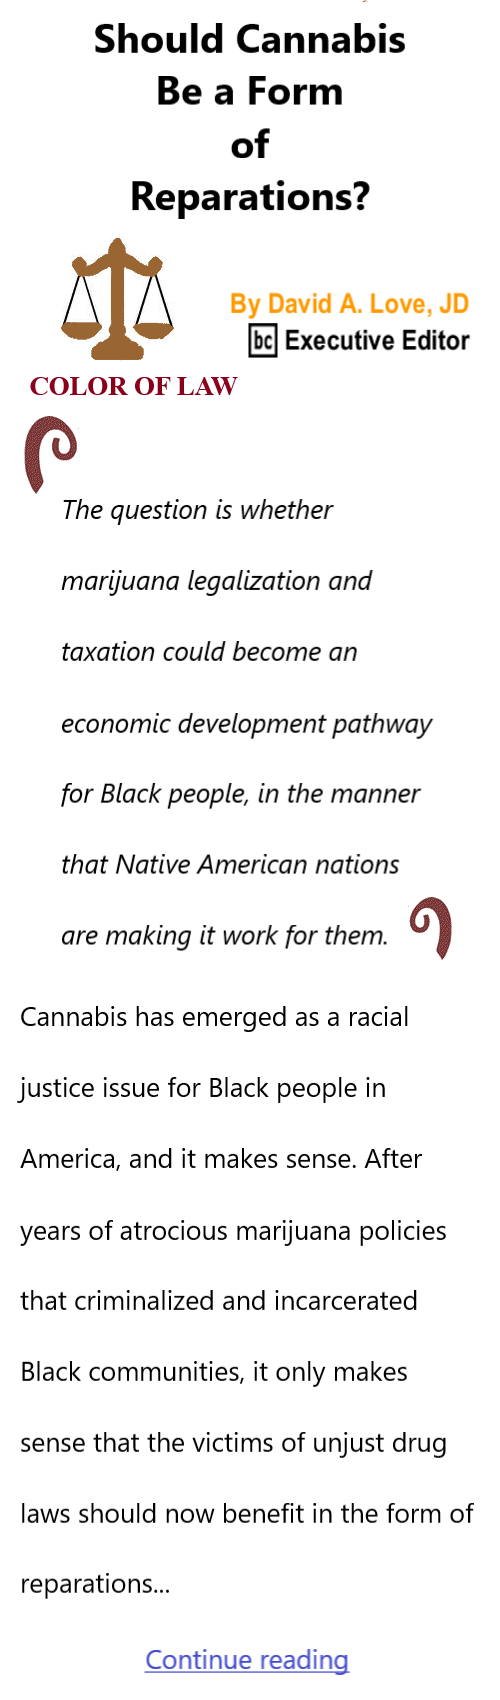 BlackCommentator.com July 25, 2024 - Issue 1010: Should Cannabis Be a Form of Reparations? - Color of Law By David A. Love, JD, BC Executive Editor